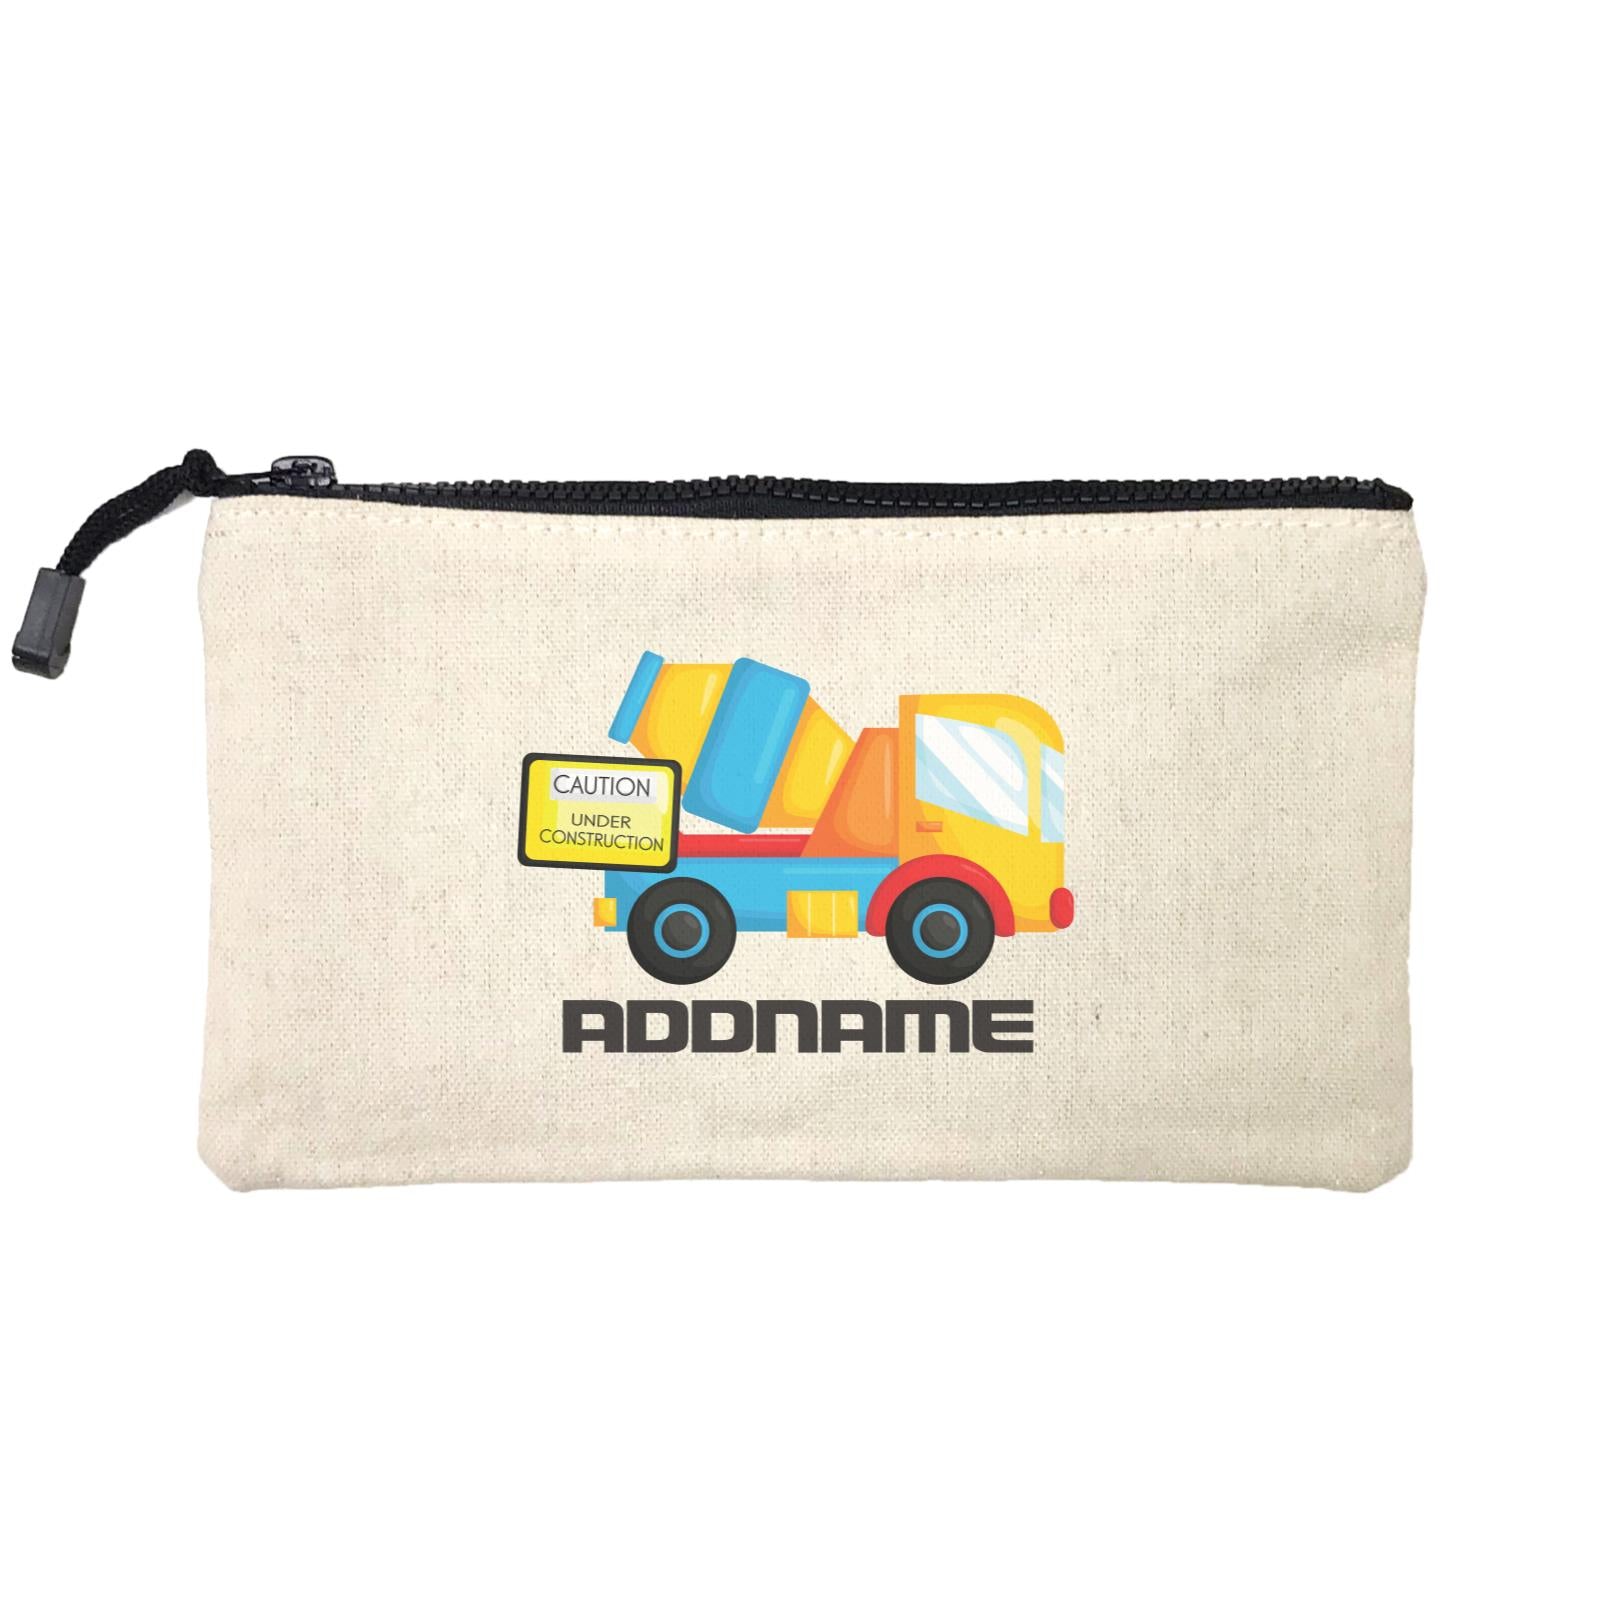 Birthday Construction Cement Mixer Addname Mini Accessories Stationery Pouch